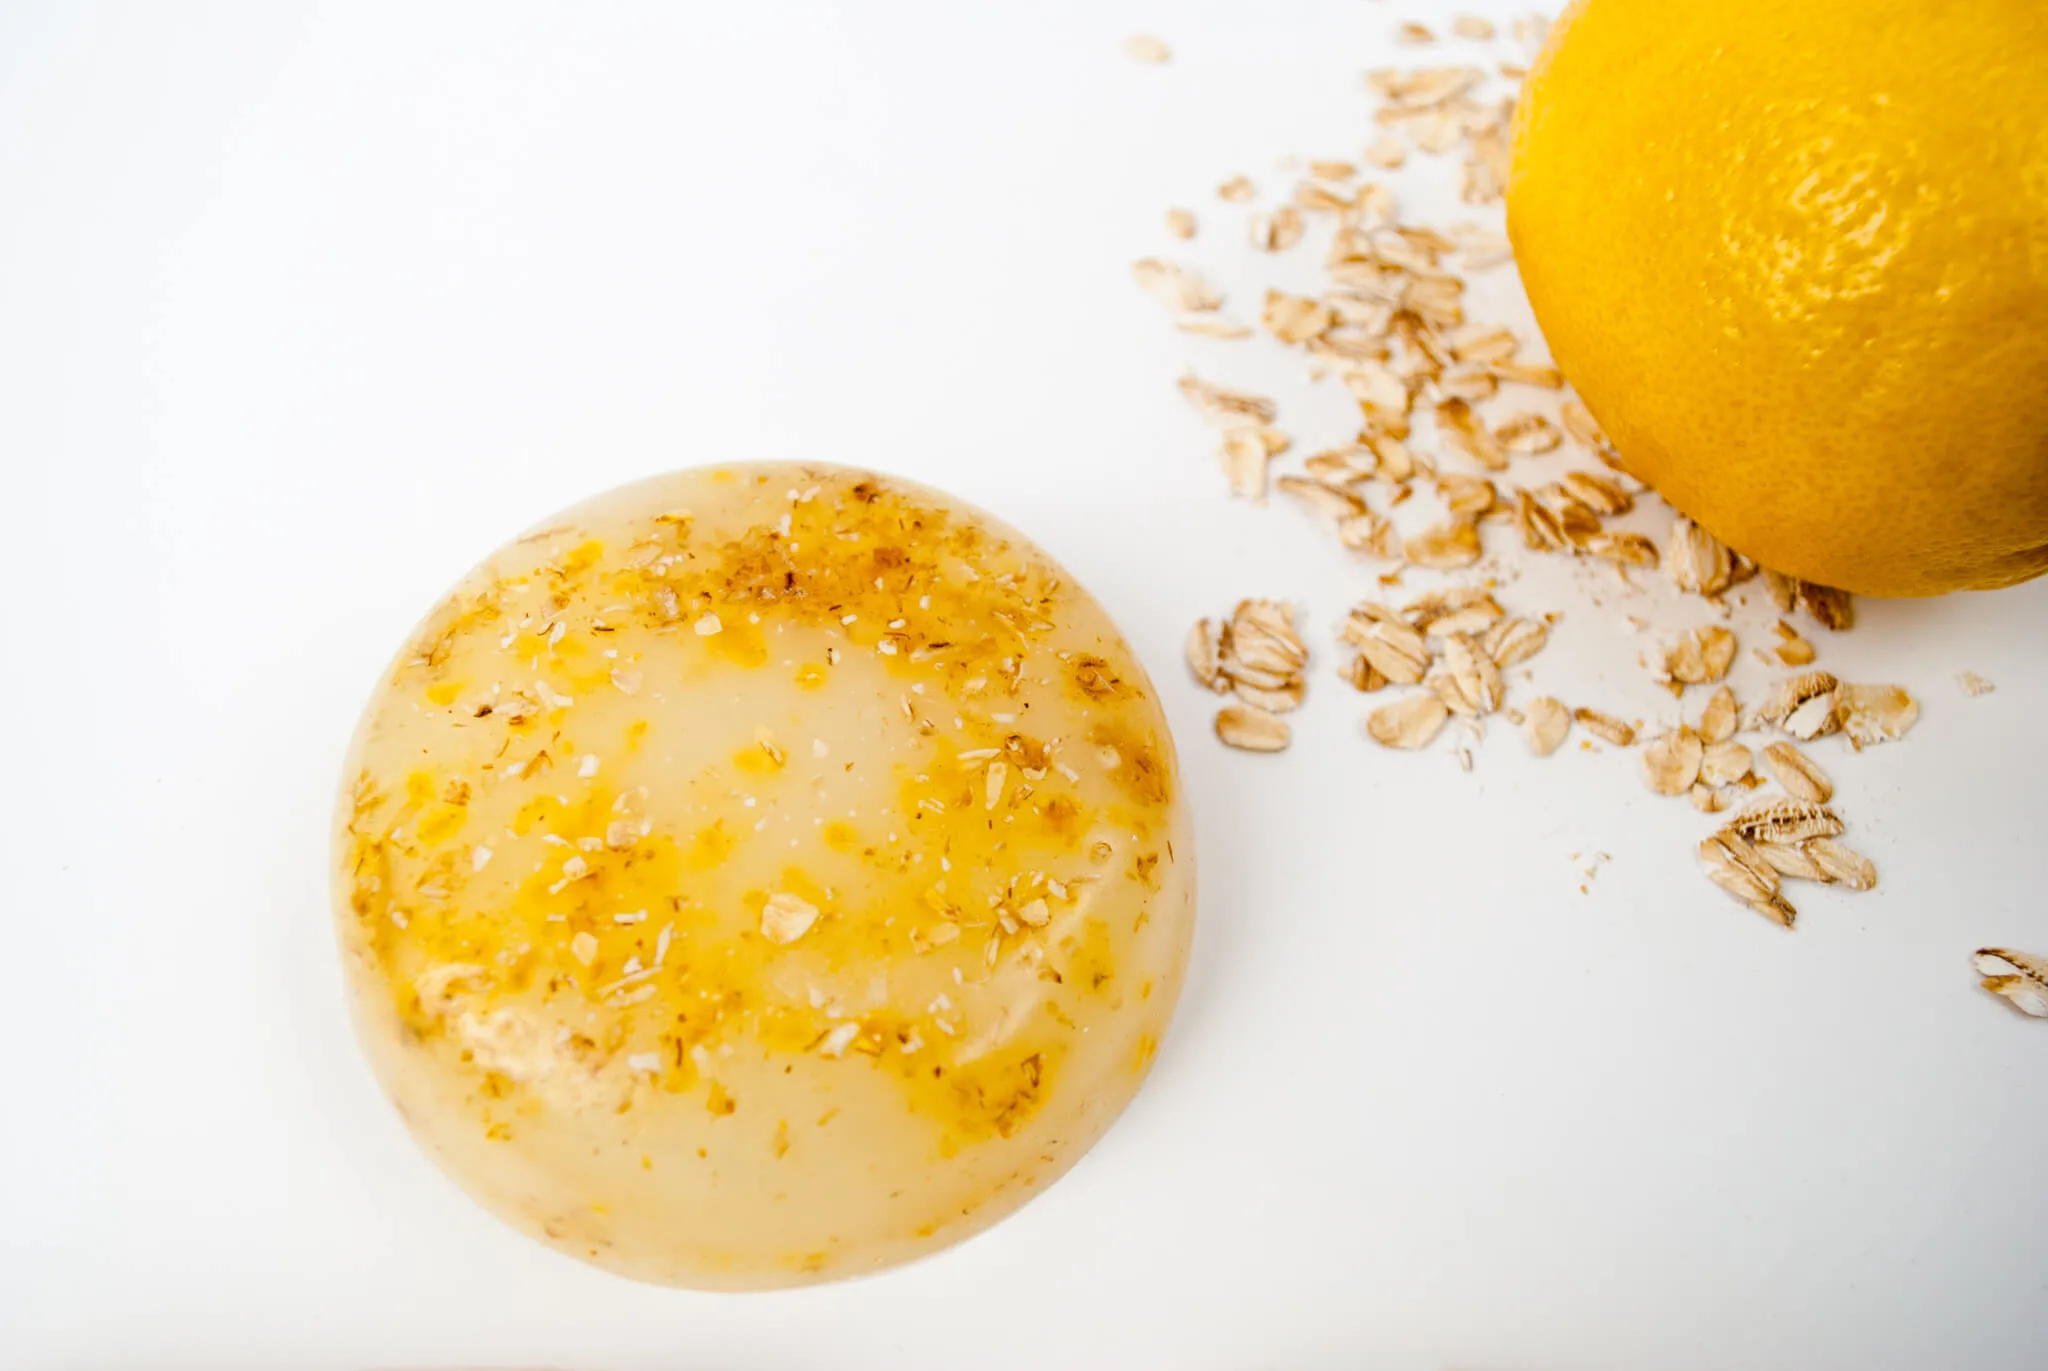 DIY Oatmeal and Lemon Soap. Make this easy 'melt and pour' soap as a DIY gift for Christmas or Mother's Day.